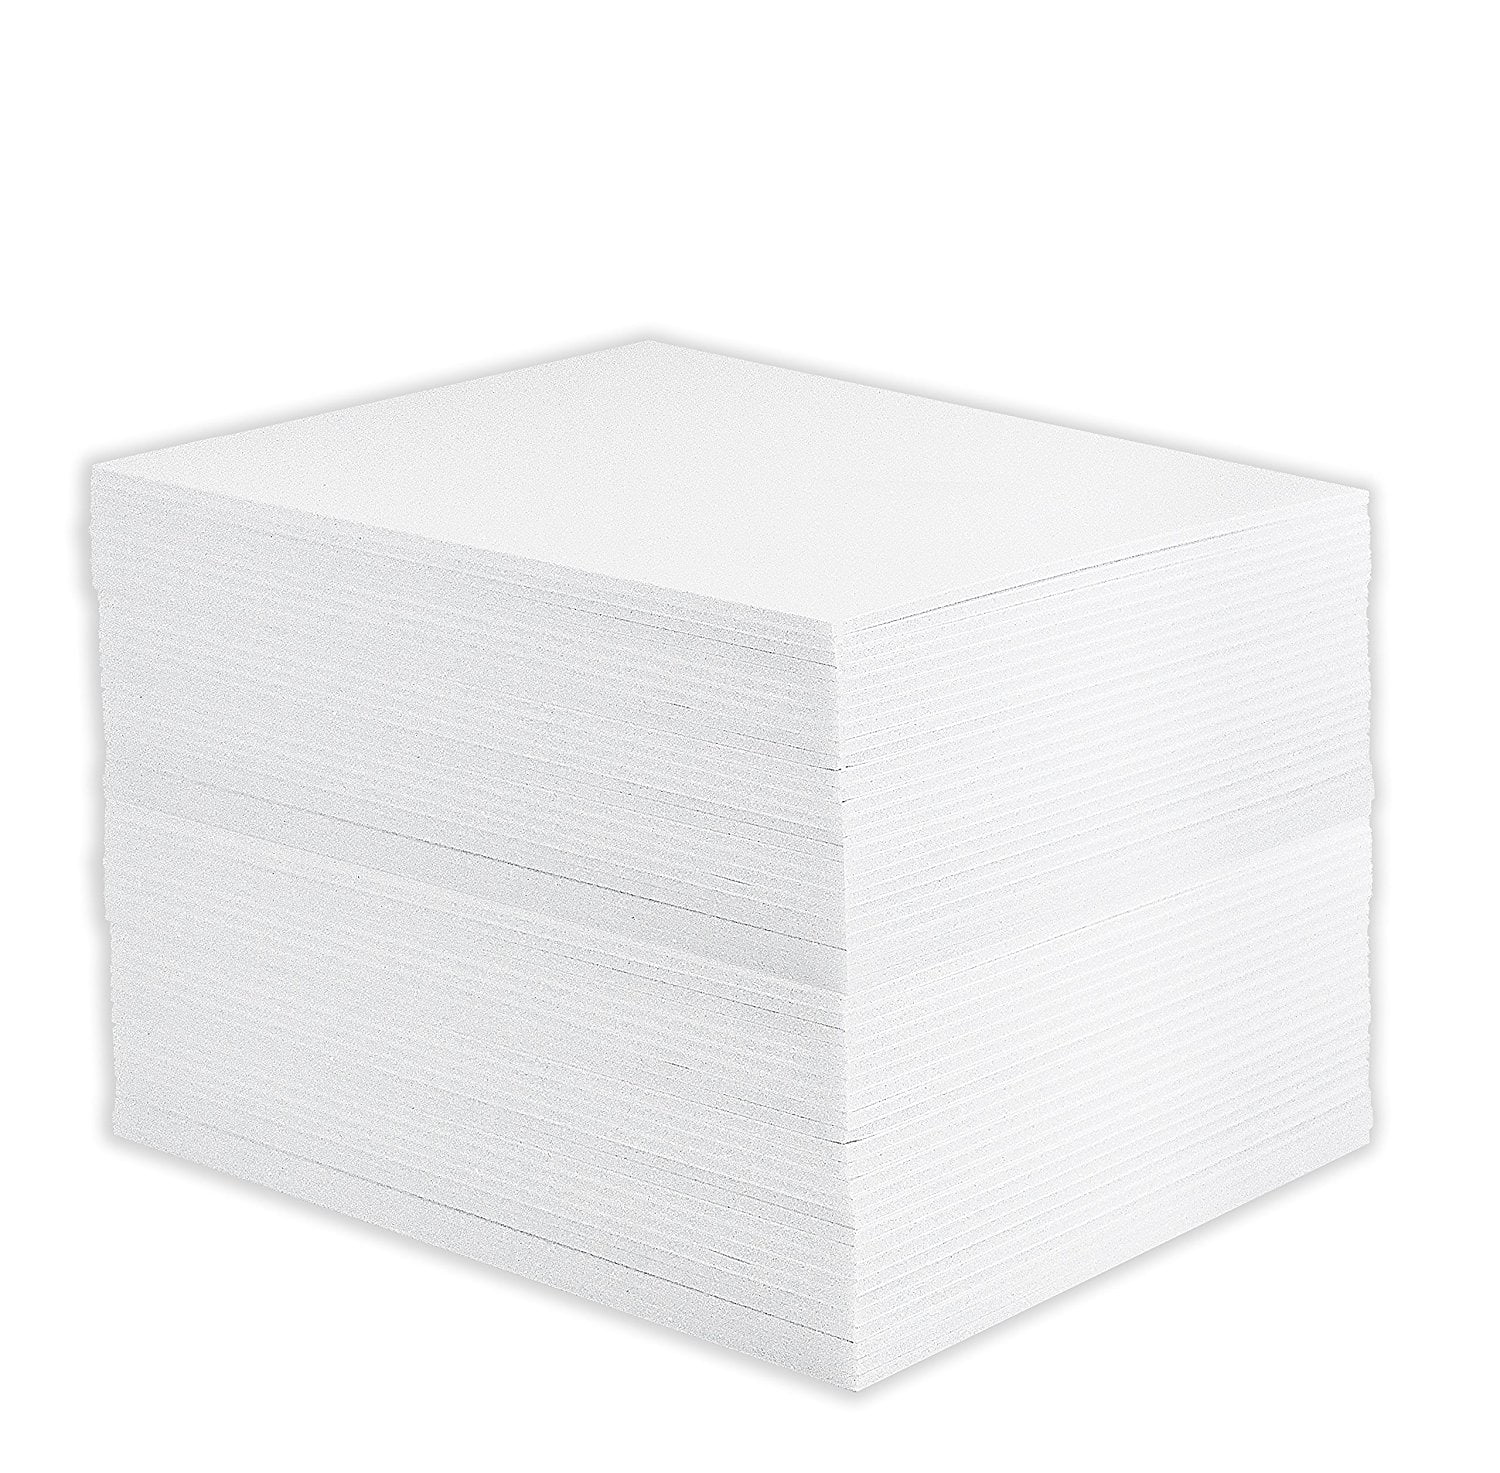 Mat Board Center 11x14, White Pack of 10 1/8 White Foam Core Backing Boards 